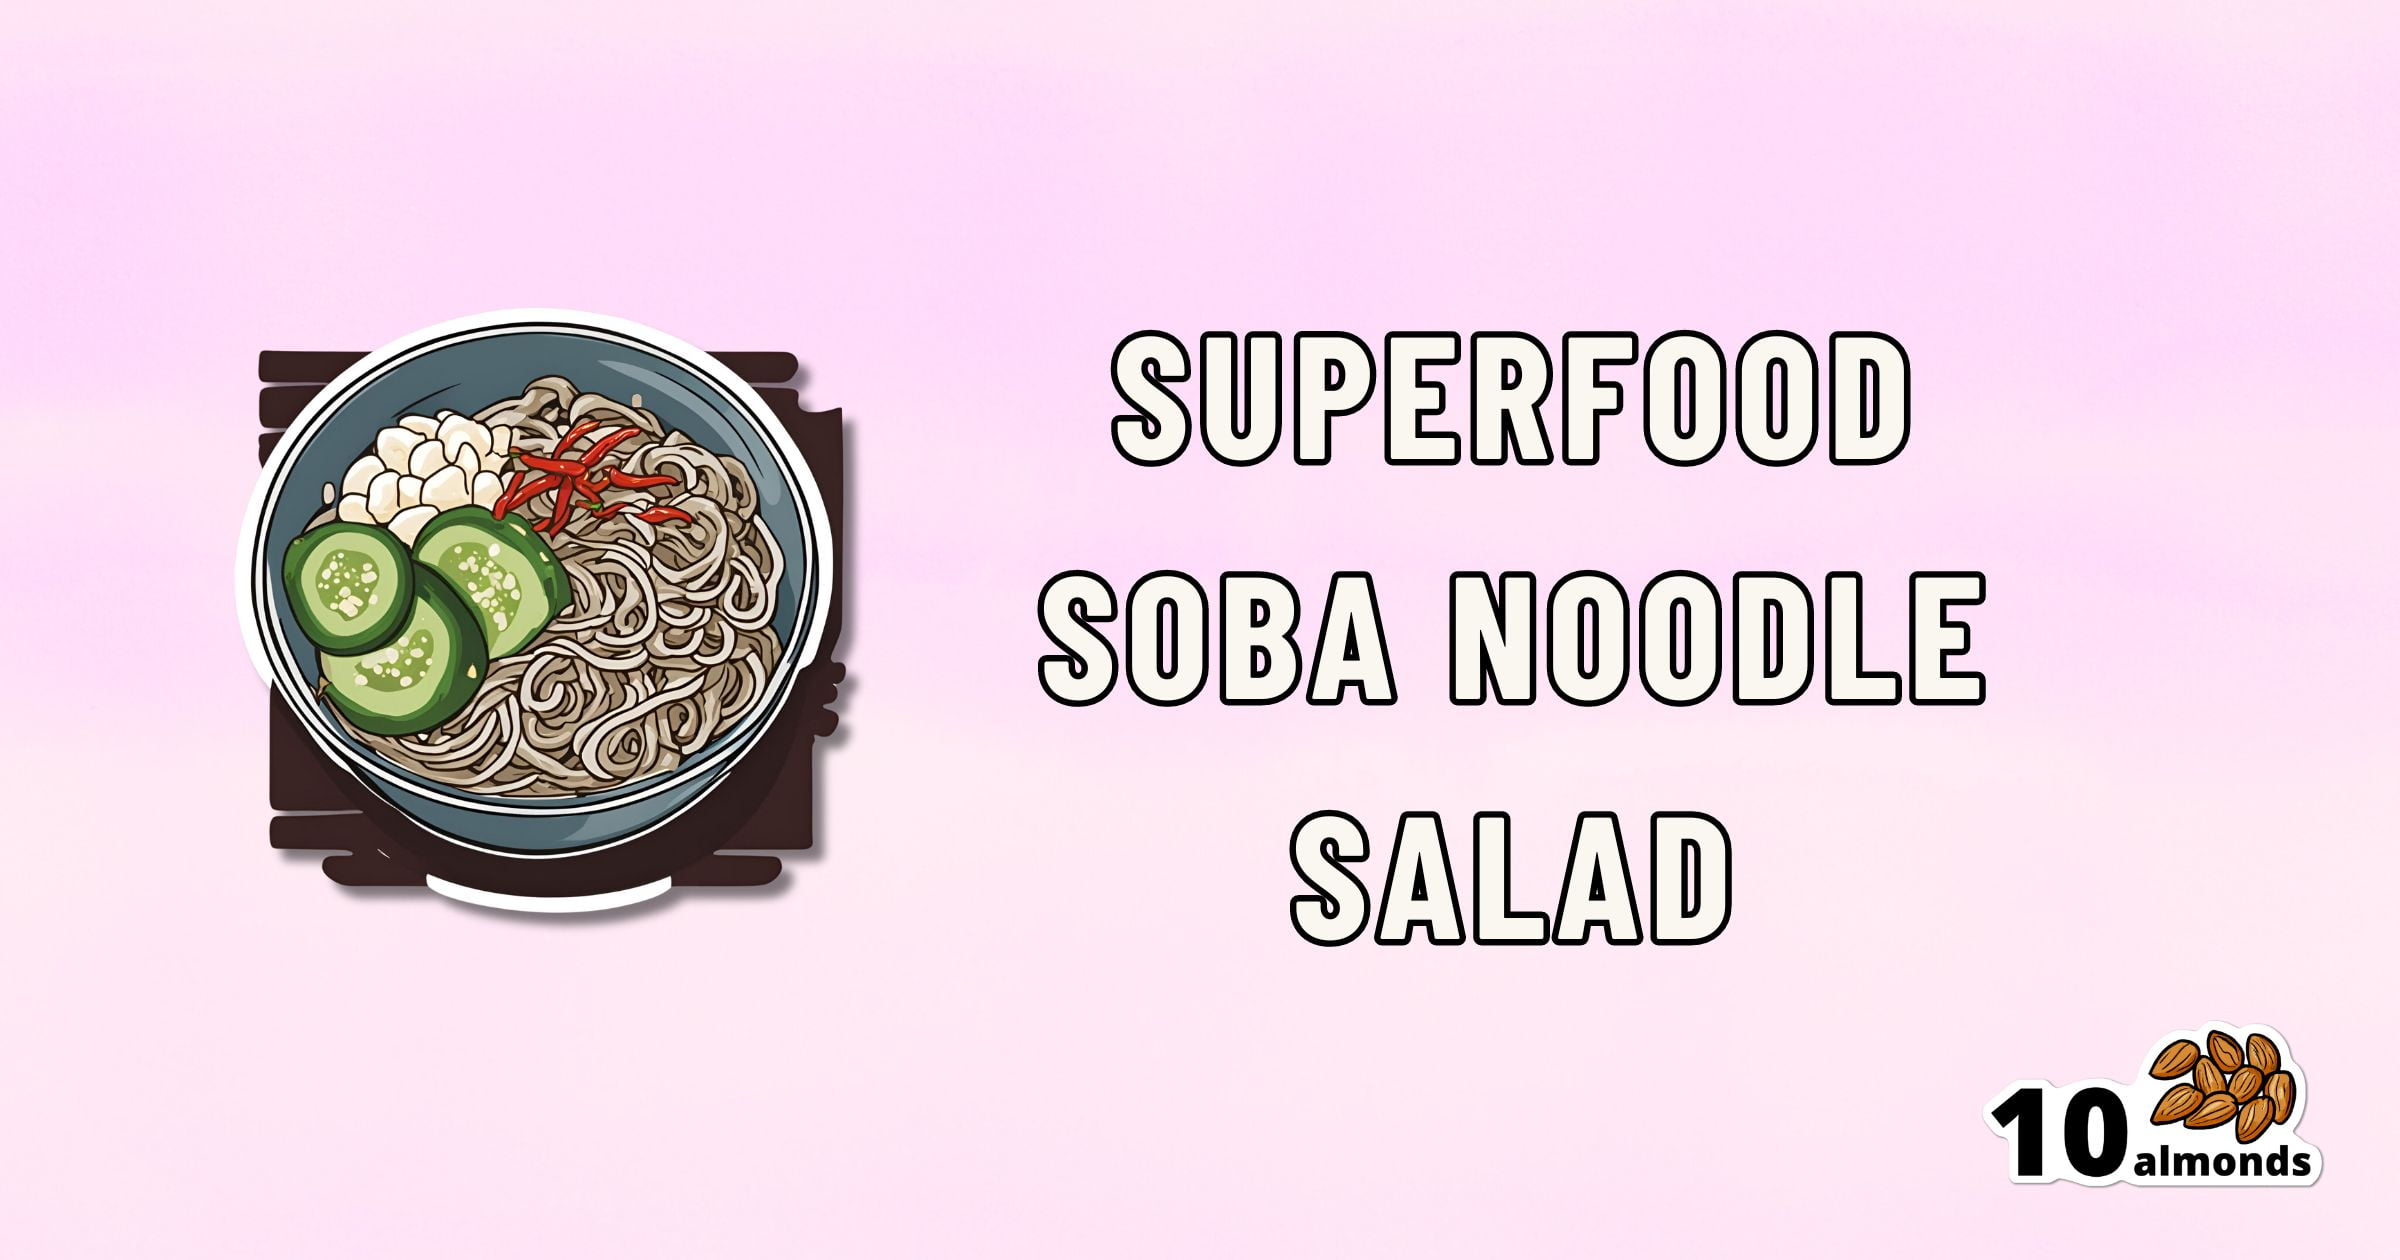 A bowl of soba noodle salad with cucumber slices, white beans, red pepper strips, and green leaves. On the right, text reads "Superfood Soba Noodle Salad." The bottom right corner displays "10 almonds" with an image of almonds. The background is pink.